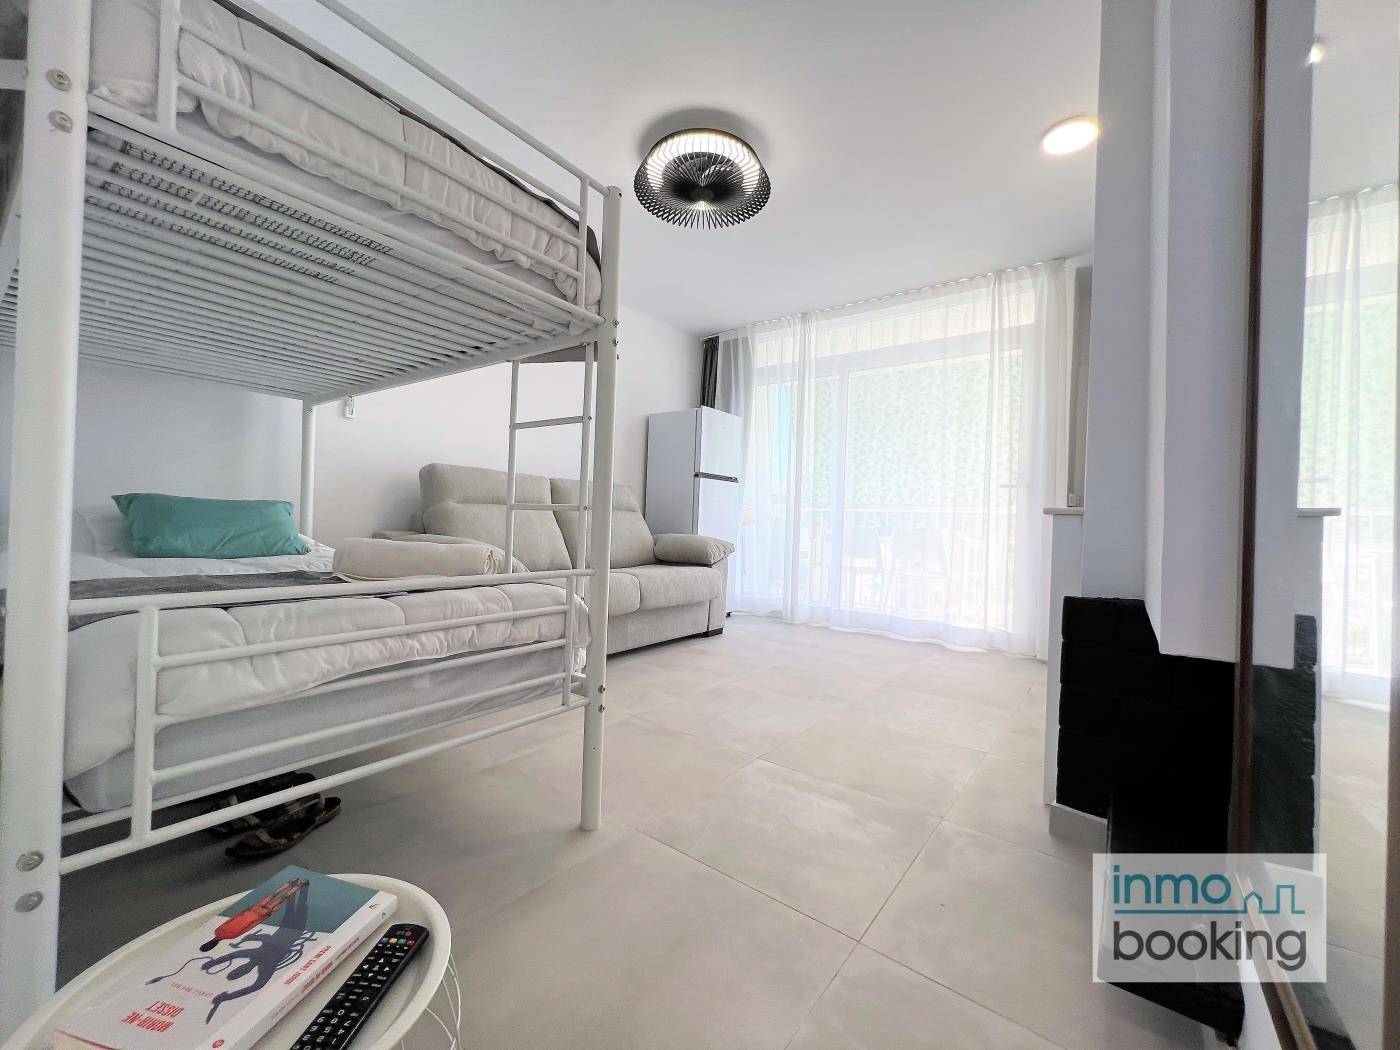 InmoBooking Loft Ancora, 5 minutes walk from the beach. in La Pineda